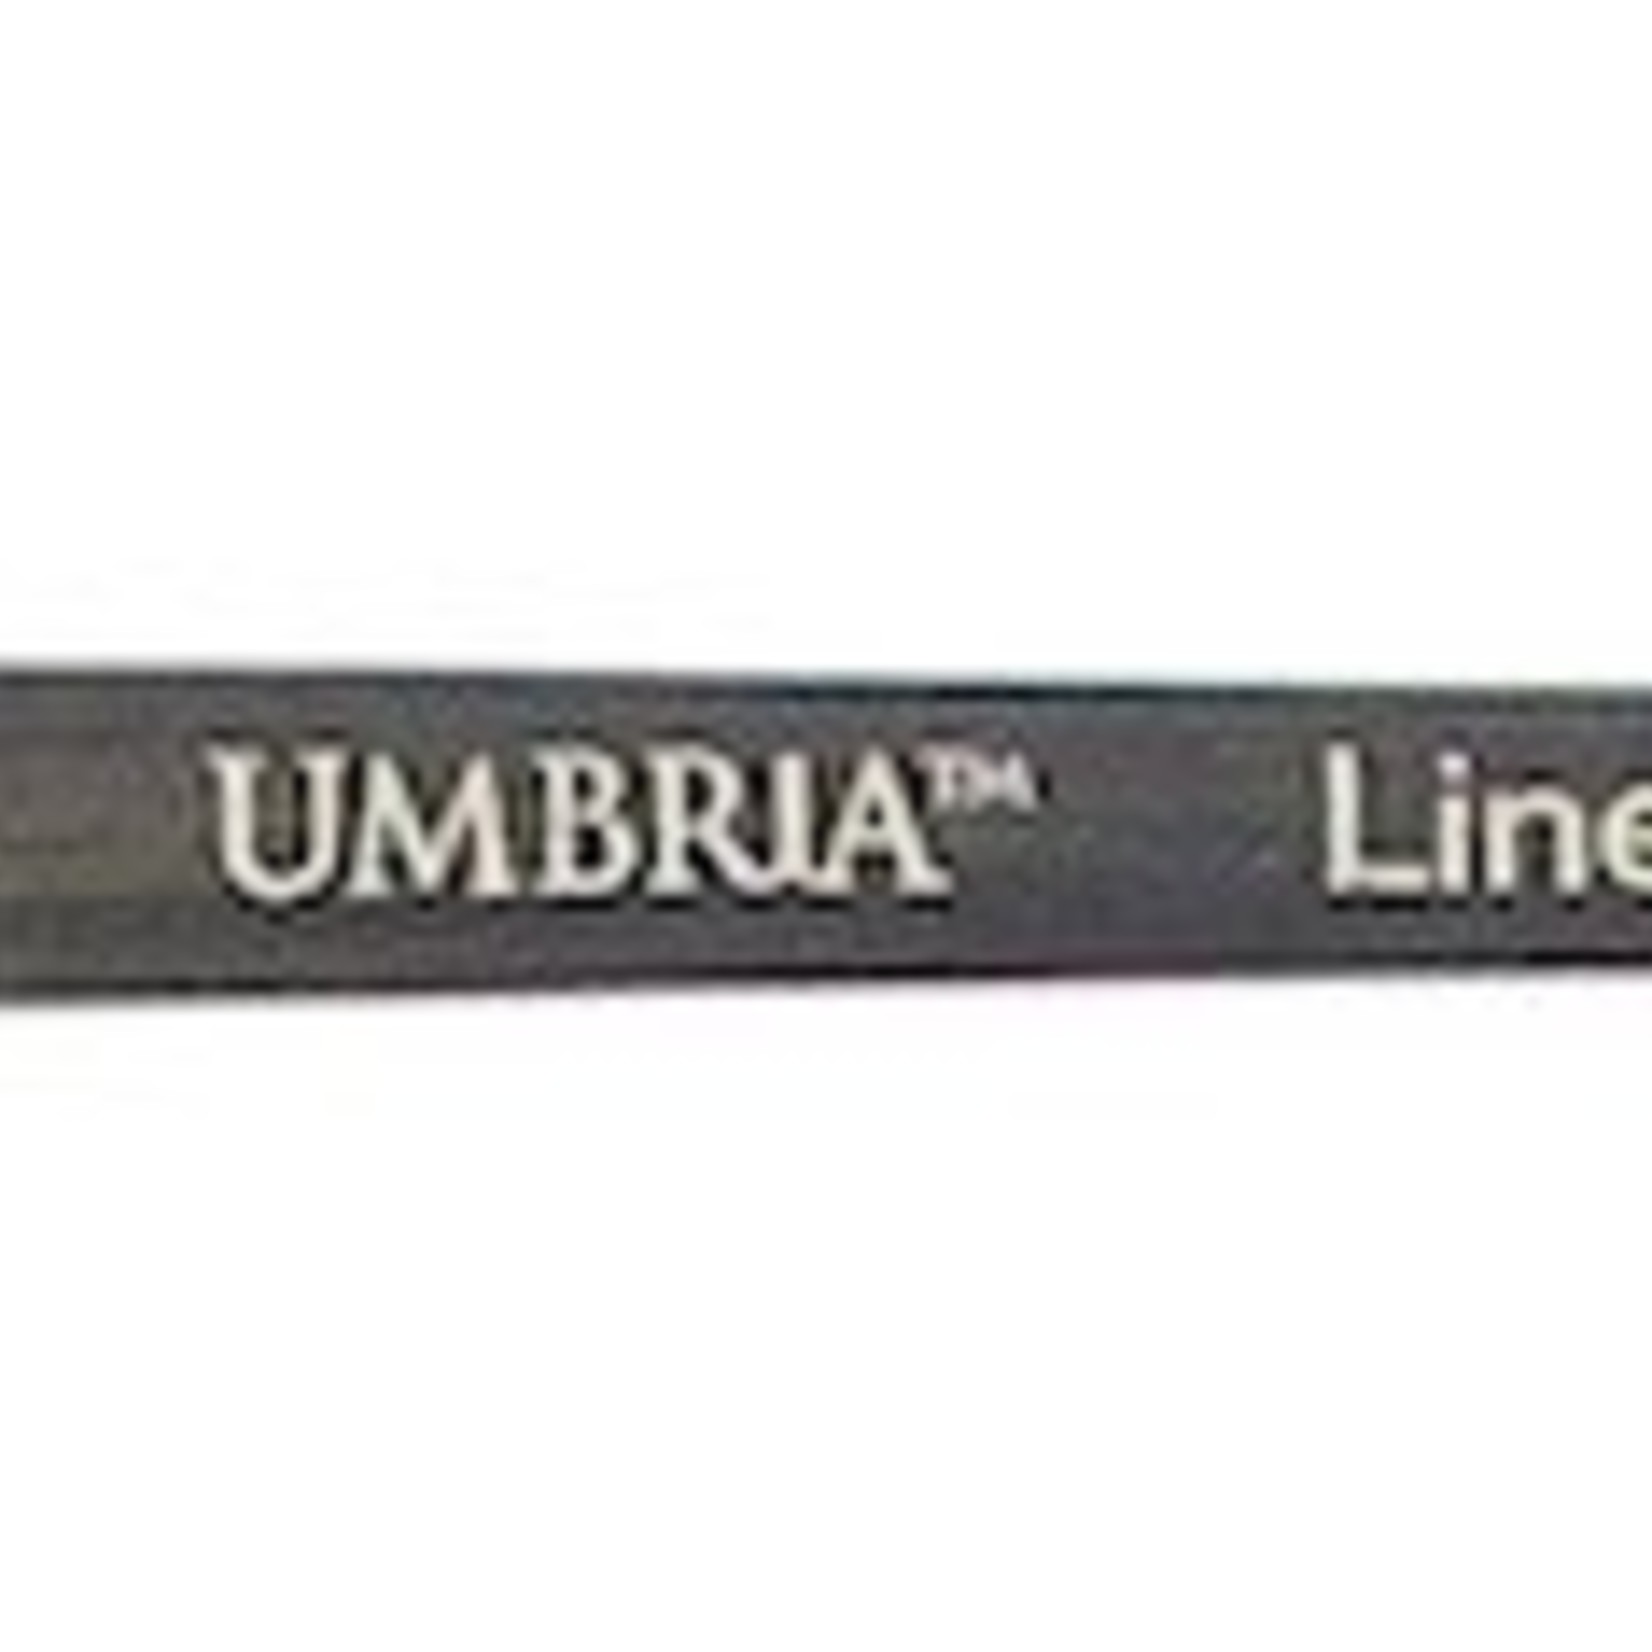 PRINCETON PRINCETON UMBRIA BRUSH SERIES 6250 SPECIAL SYNTHETIC SH LINER 4